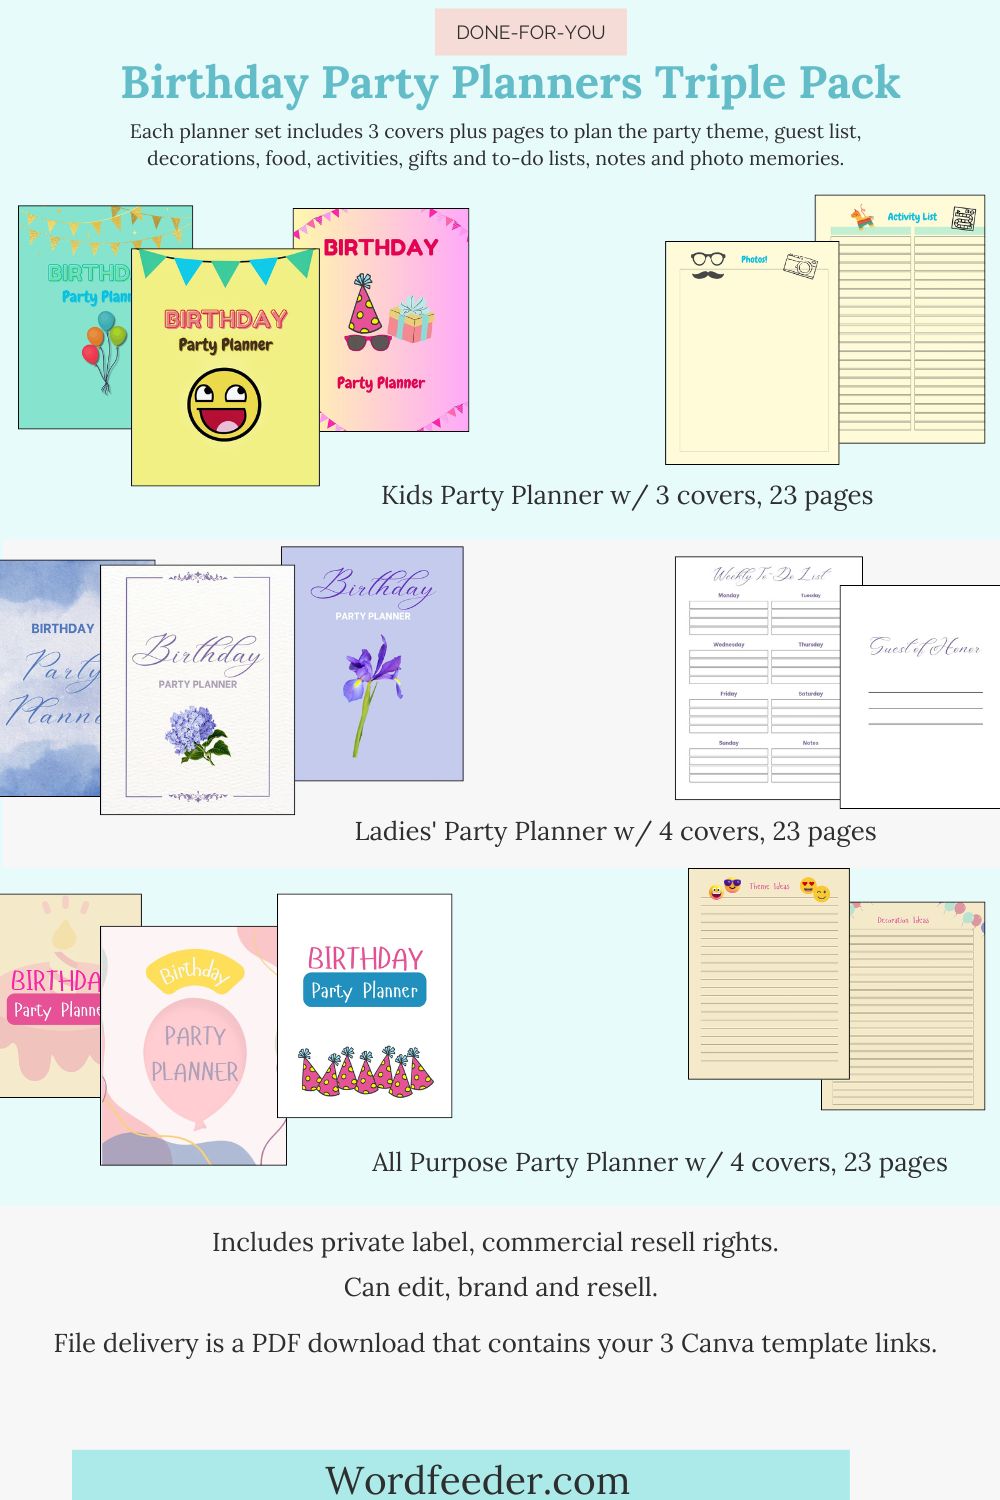 Birthday Party Planners Triple Pack Bundle